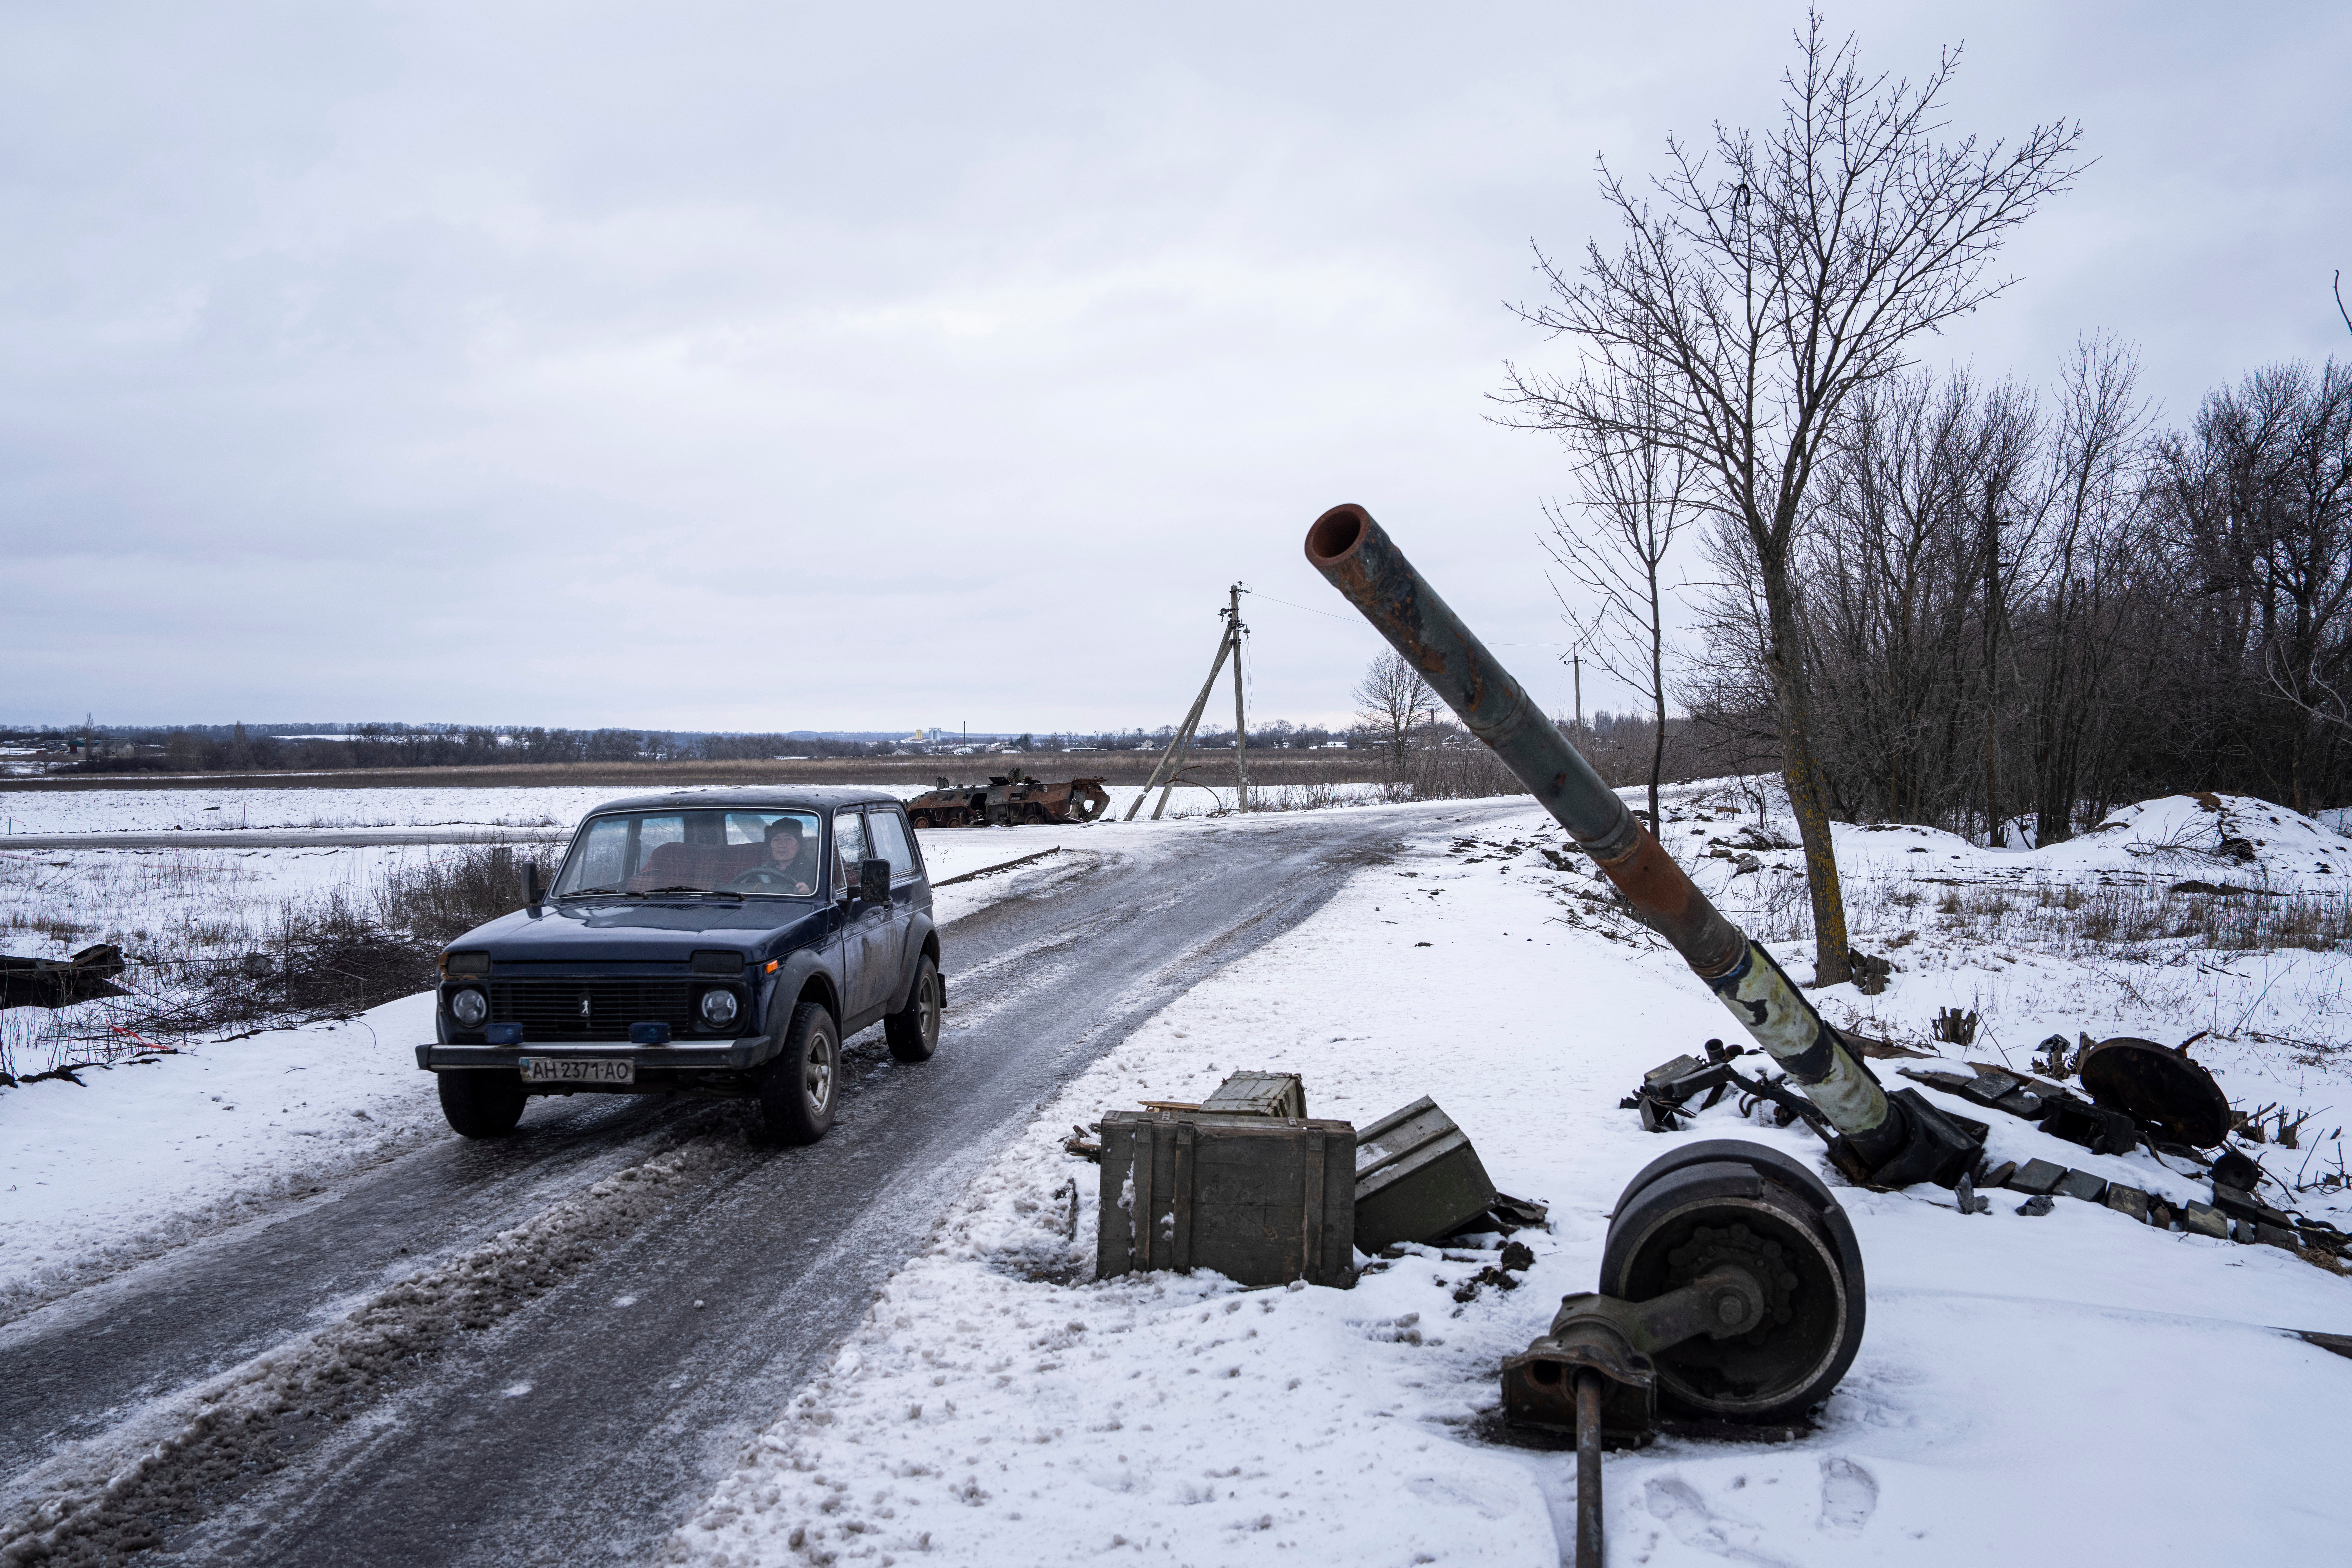 A car drives past a destroyed tank at the former positions of Russian forces in Ridkodub village, Ukraine